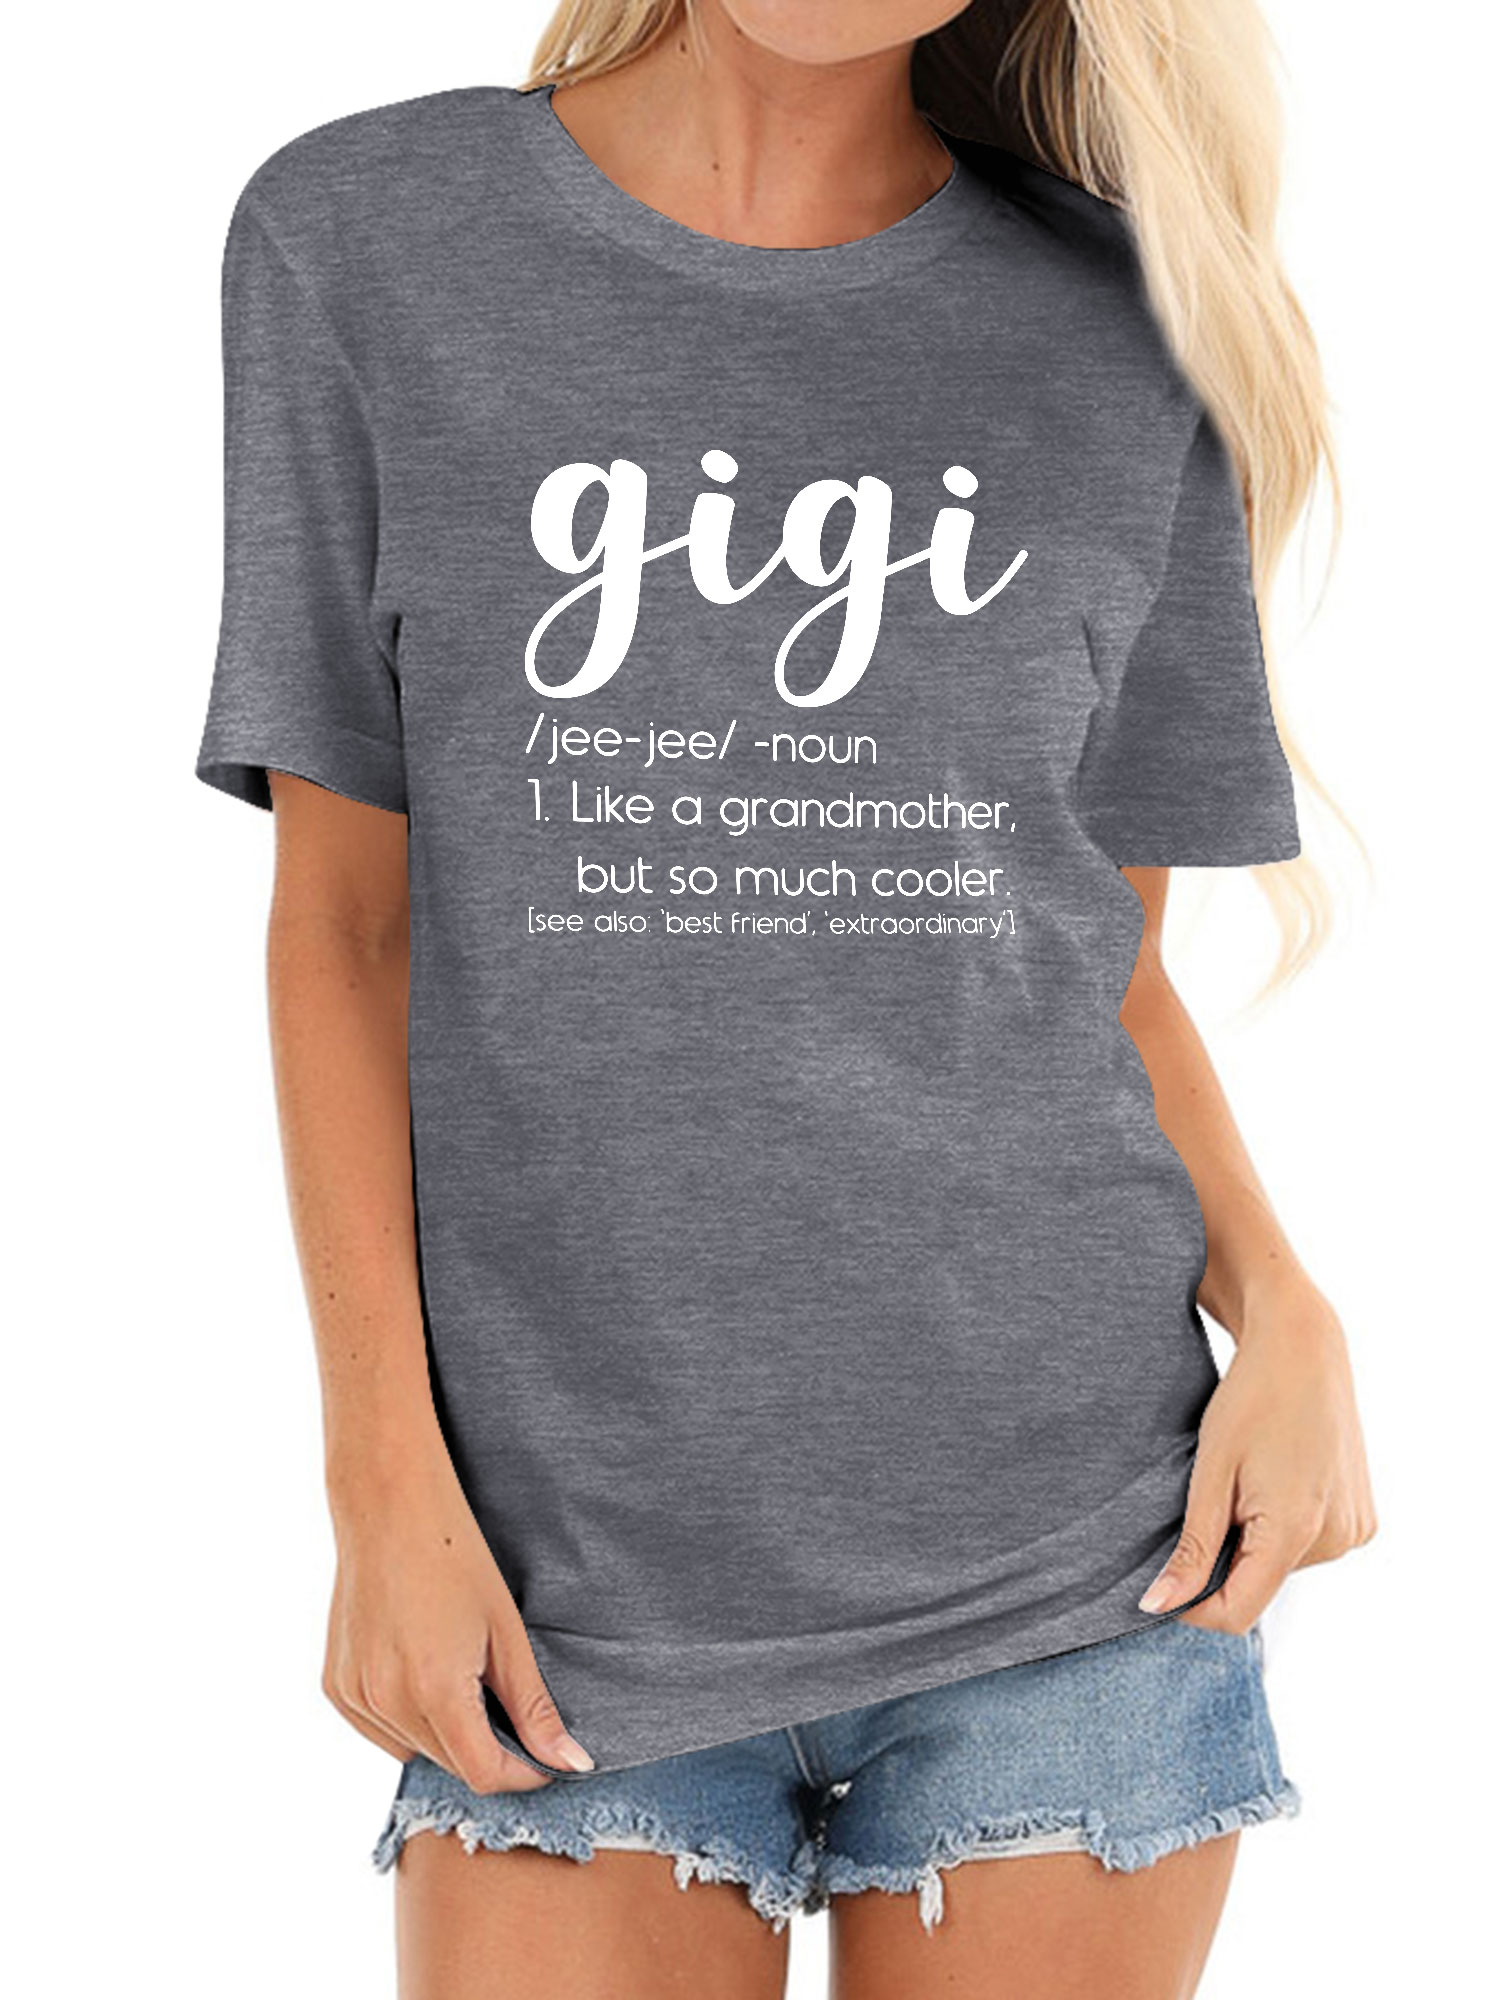 TWZH Women Gigi Jee Jee Noun Like A Grandmother But So Much Cooler T-shirts - image 2 of 6